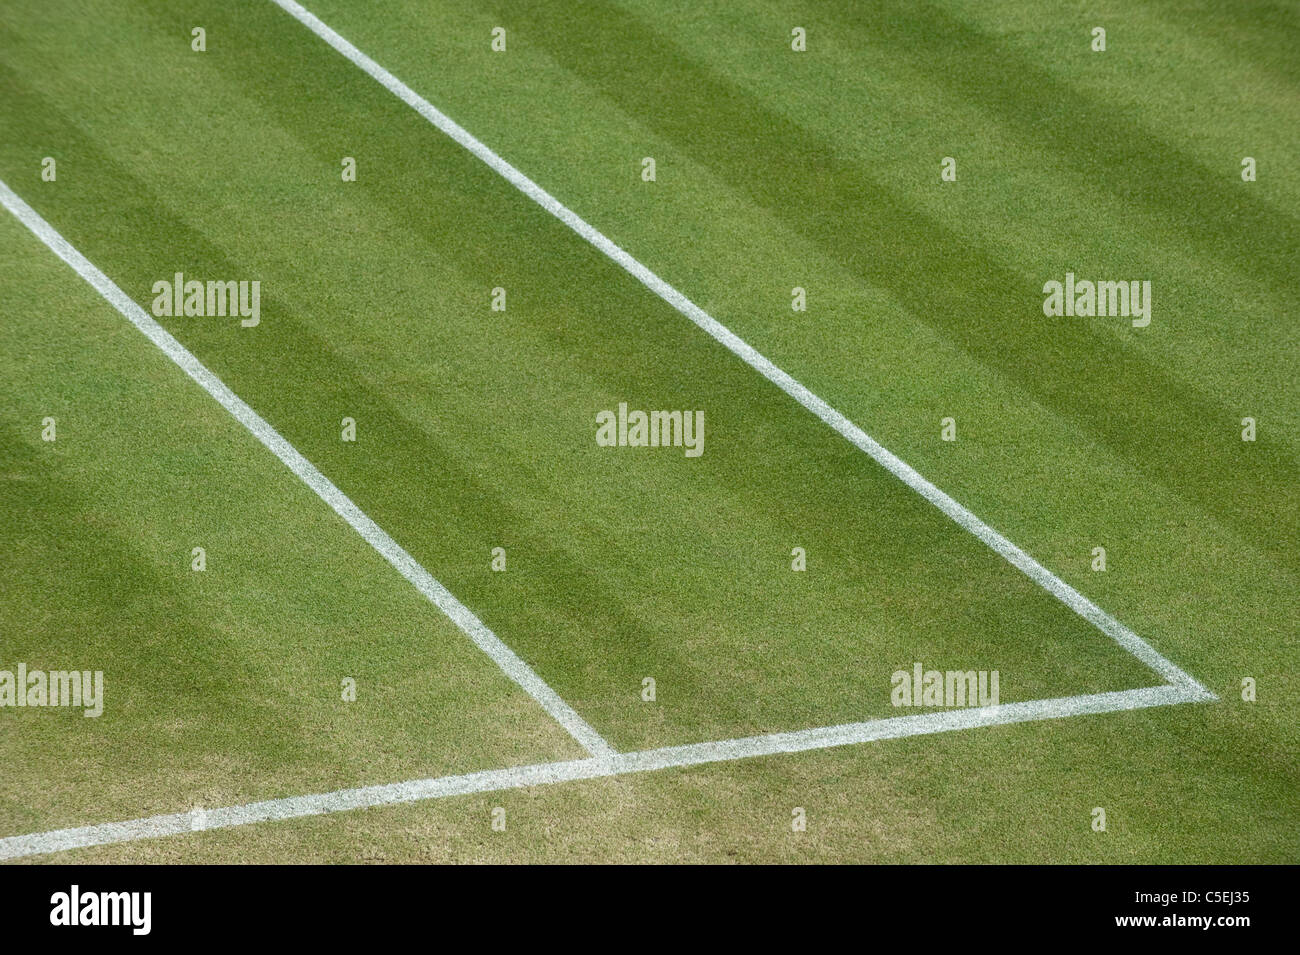 Detail of grass and lines on an outside court during the 2011 Wimbledon Tennis Championships  Stock Photo